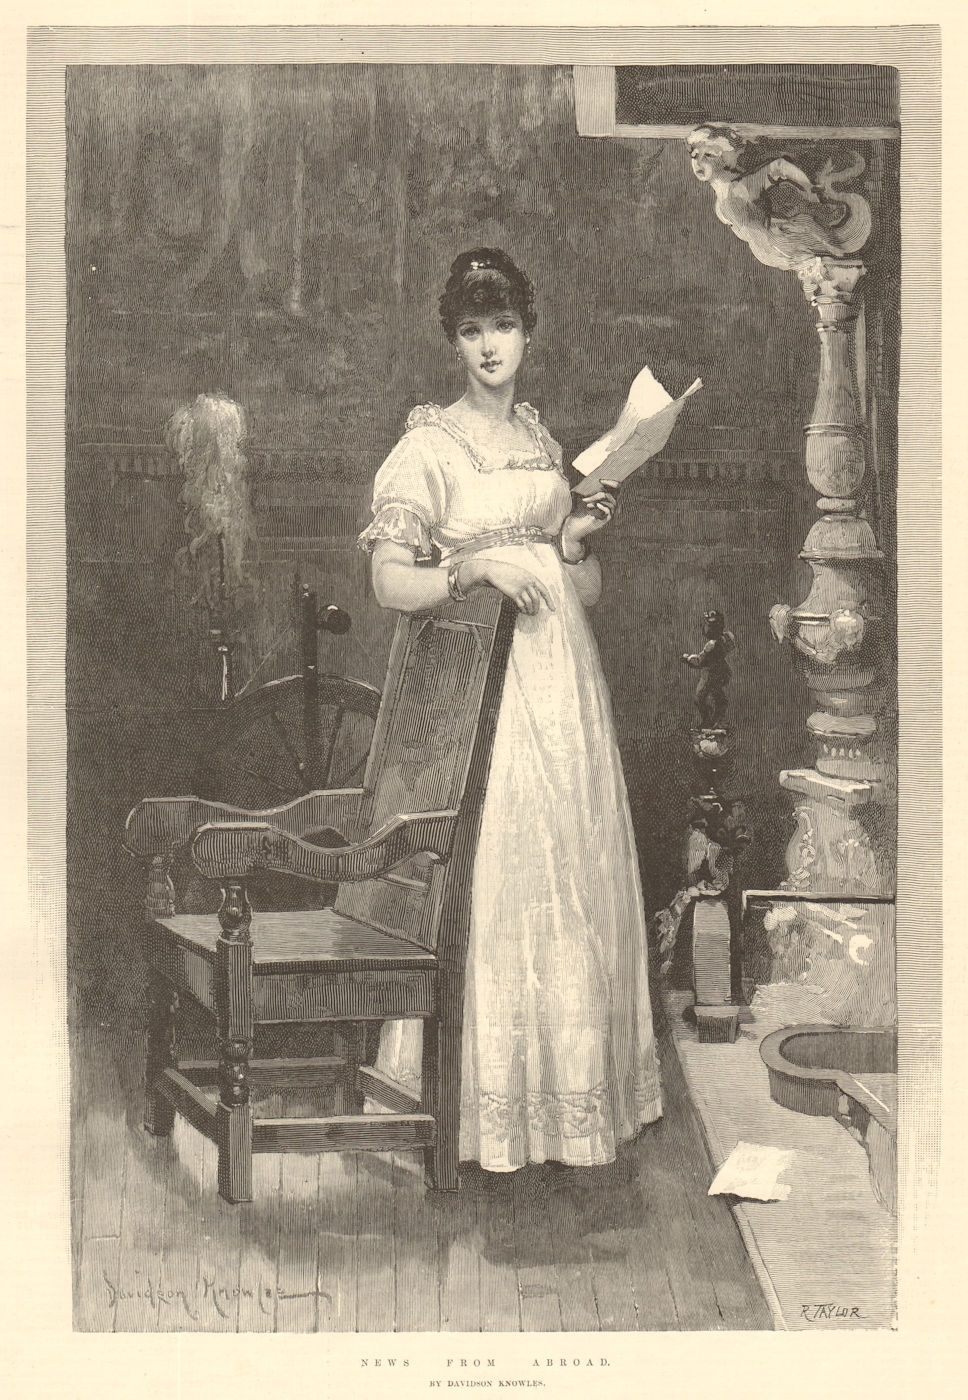 Associate Product "News from abroad", by Davidson Knowles. Pretty Ladies. Letters 1890 old print